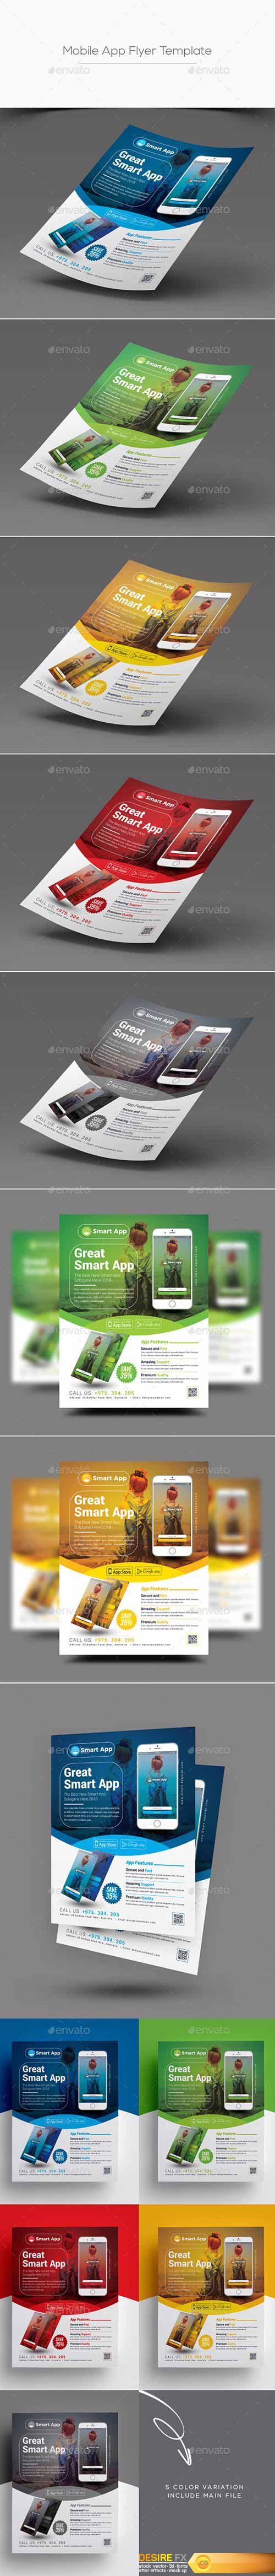 Graphicriver - Mobile App Flyer Template 20692404